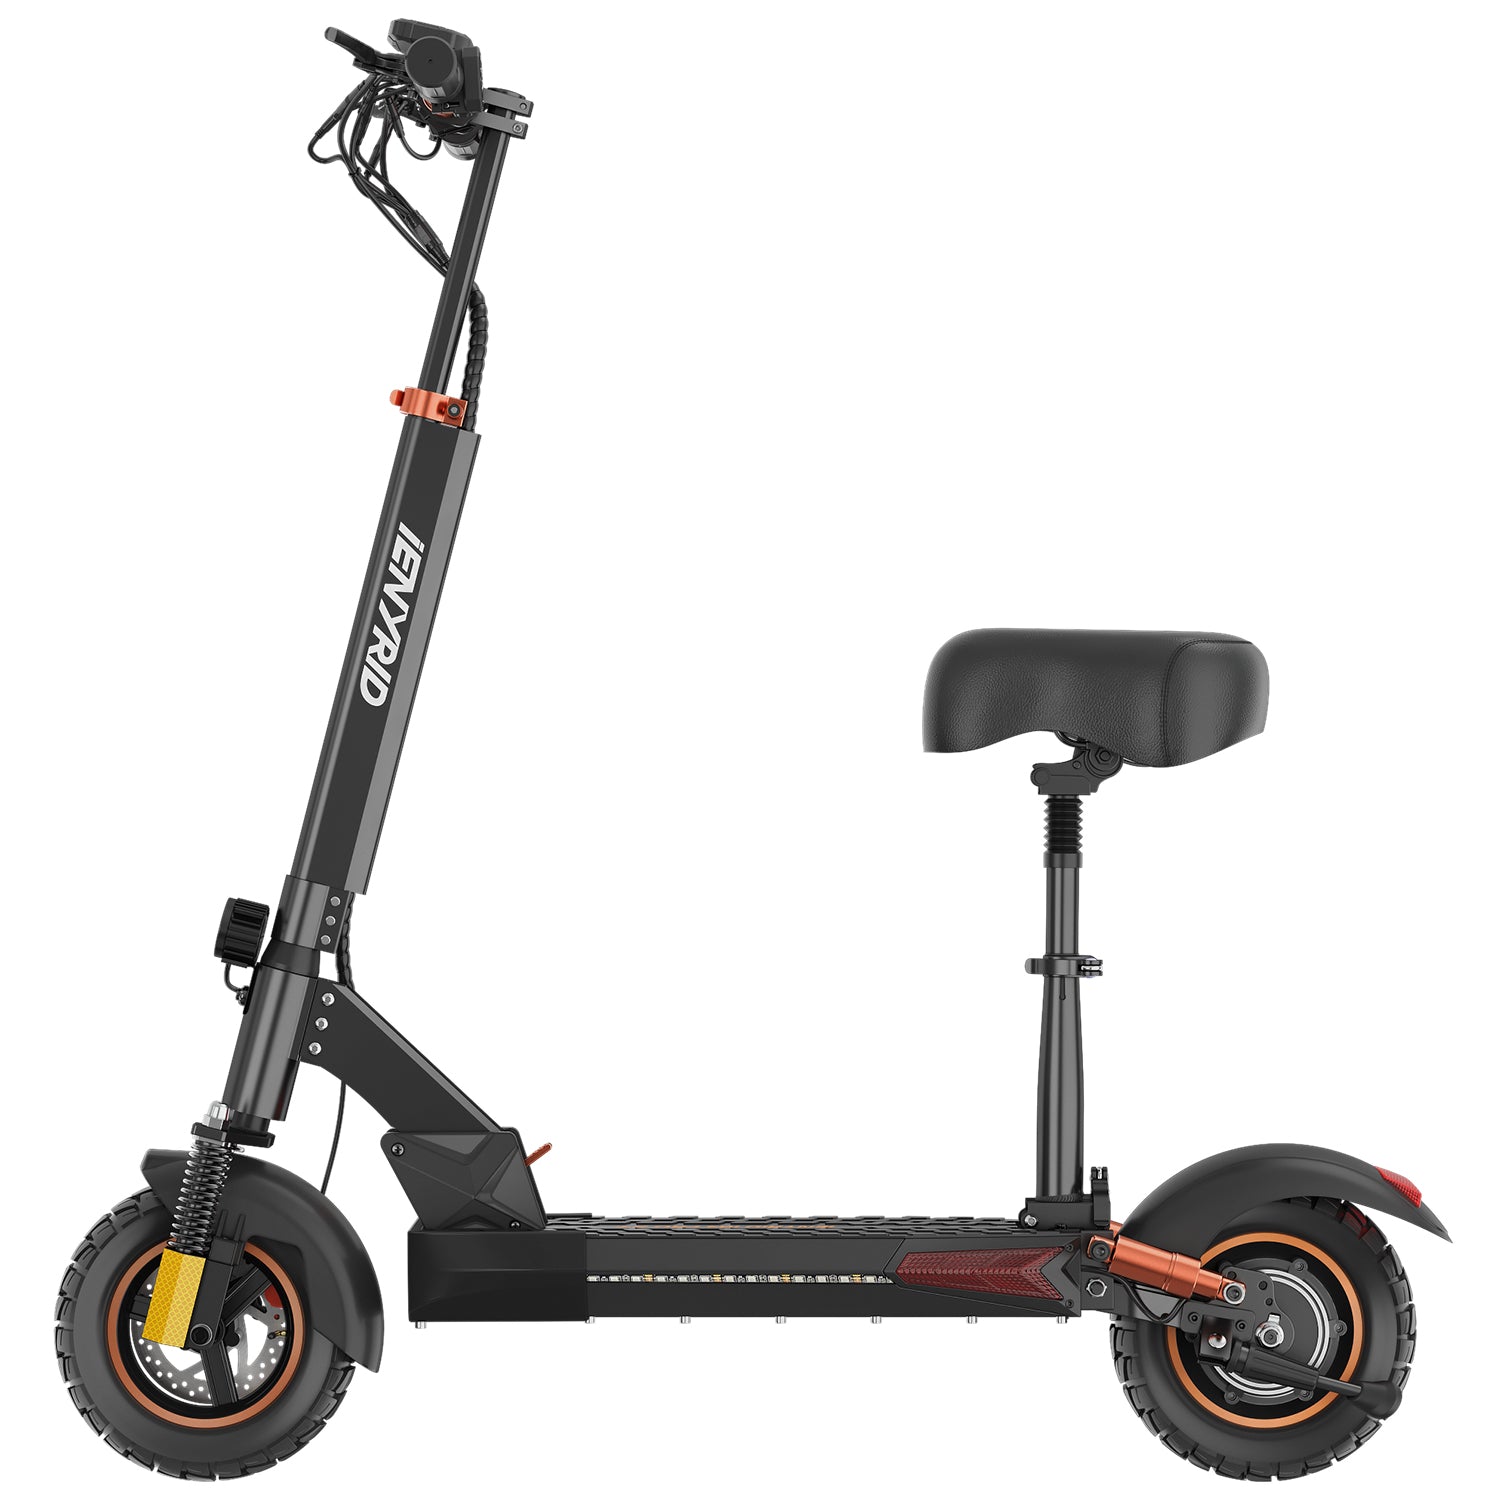 IENYRID M4 PRO S+ MAX 800W Motor 10 Inch Off-road Electric Scooter 20Ah Battery